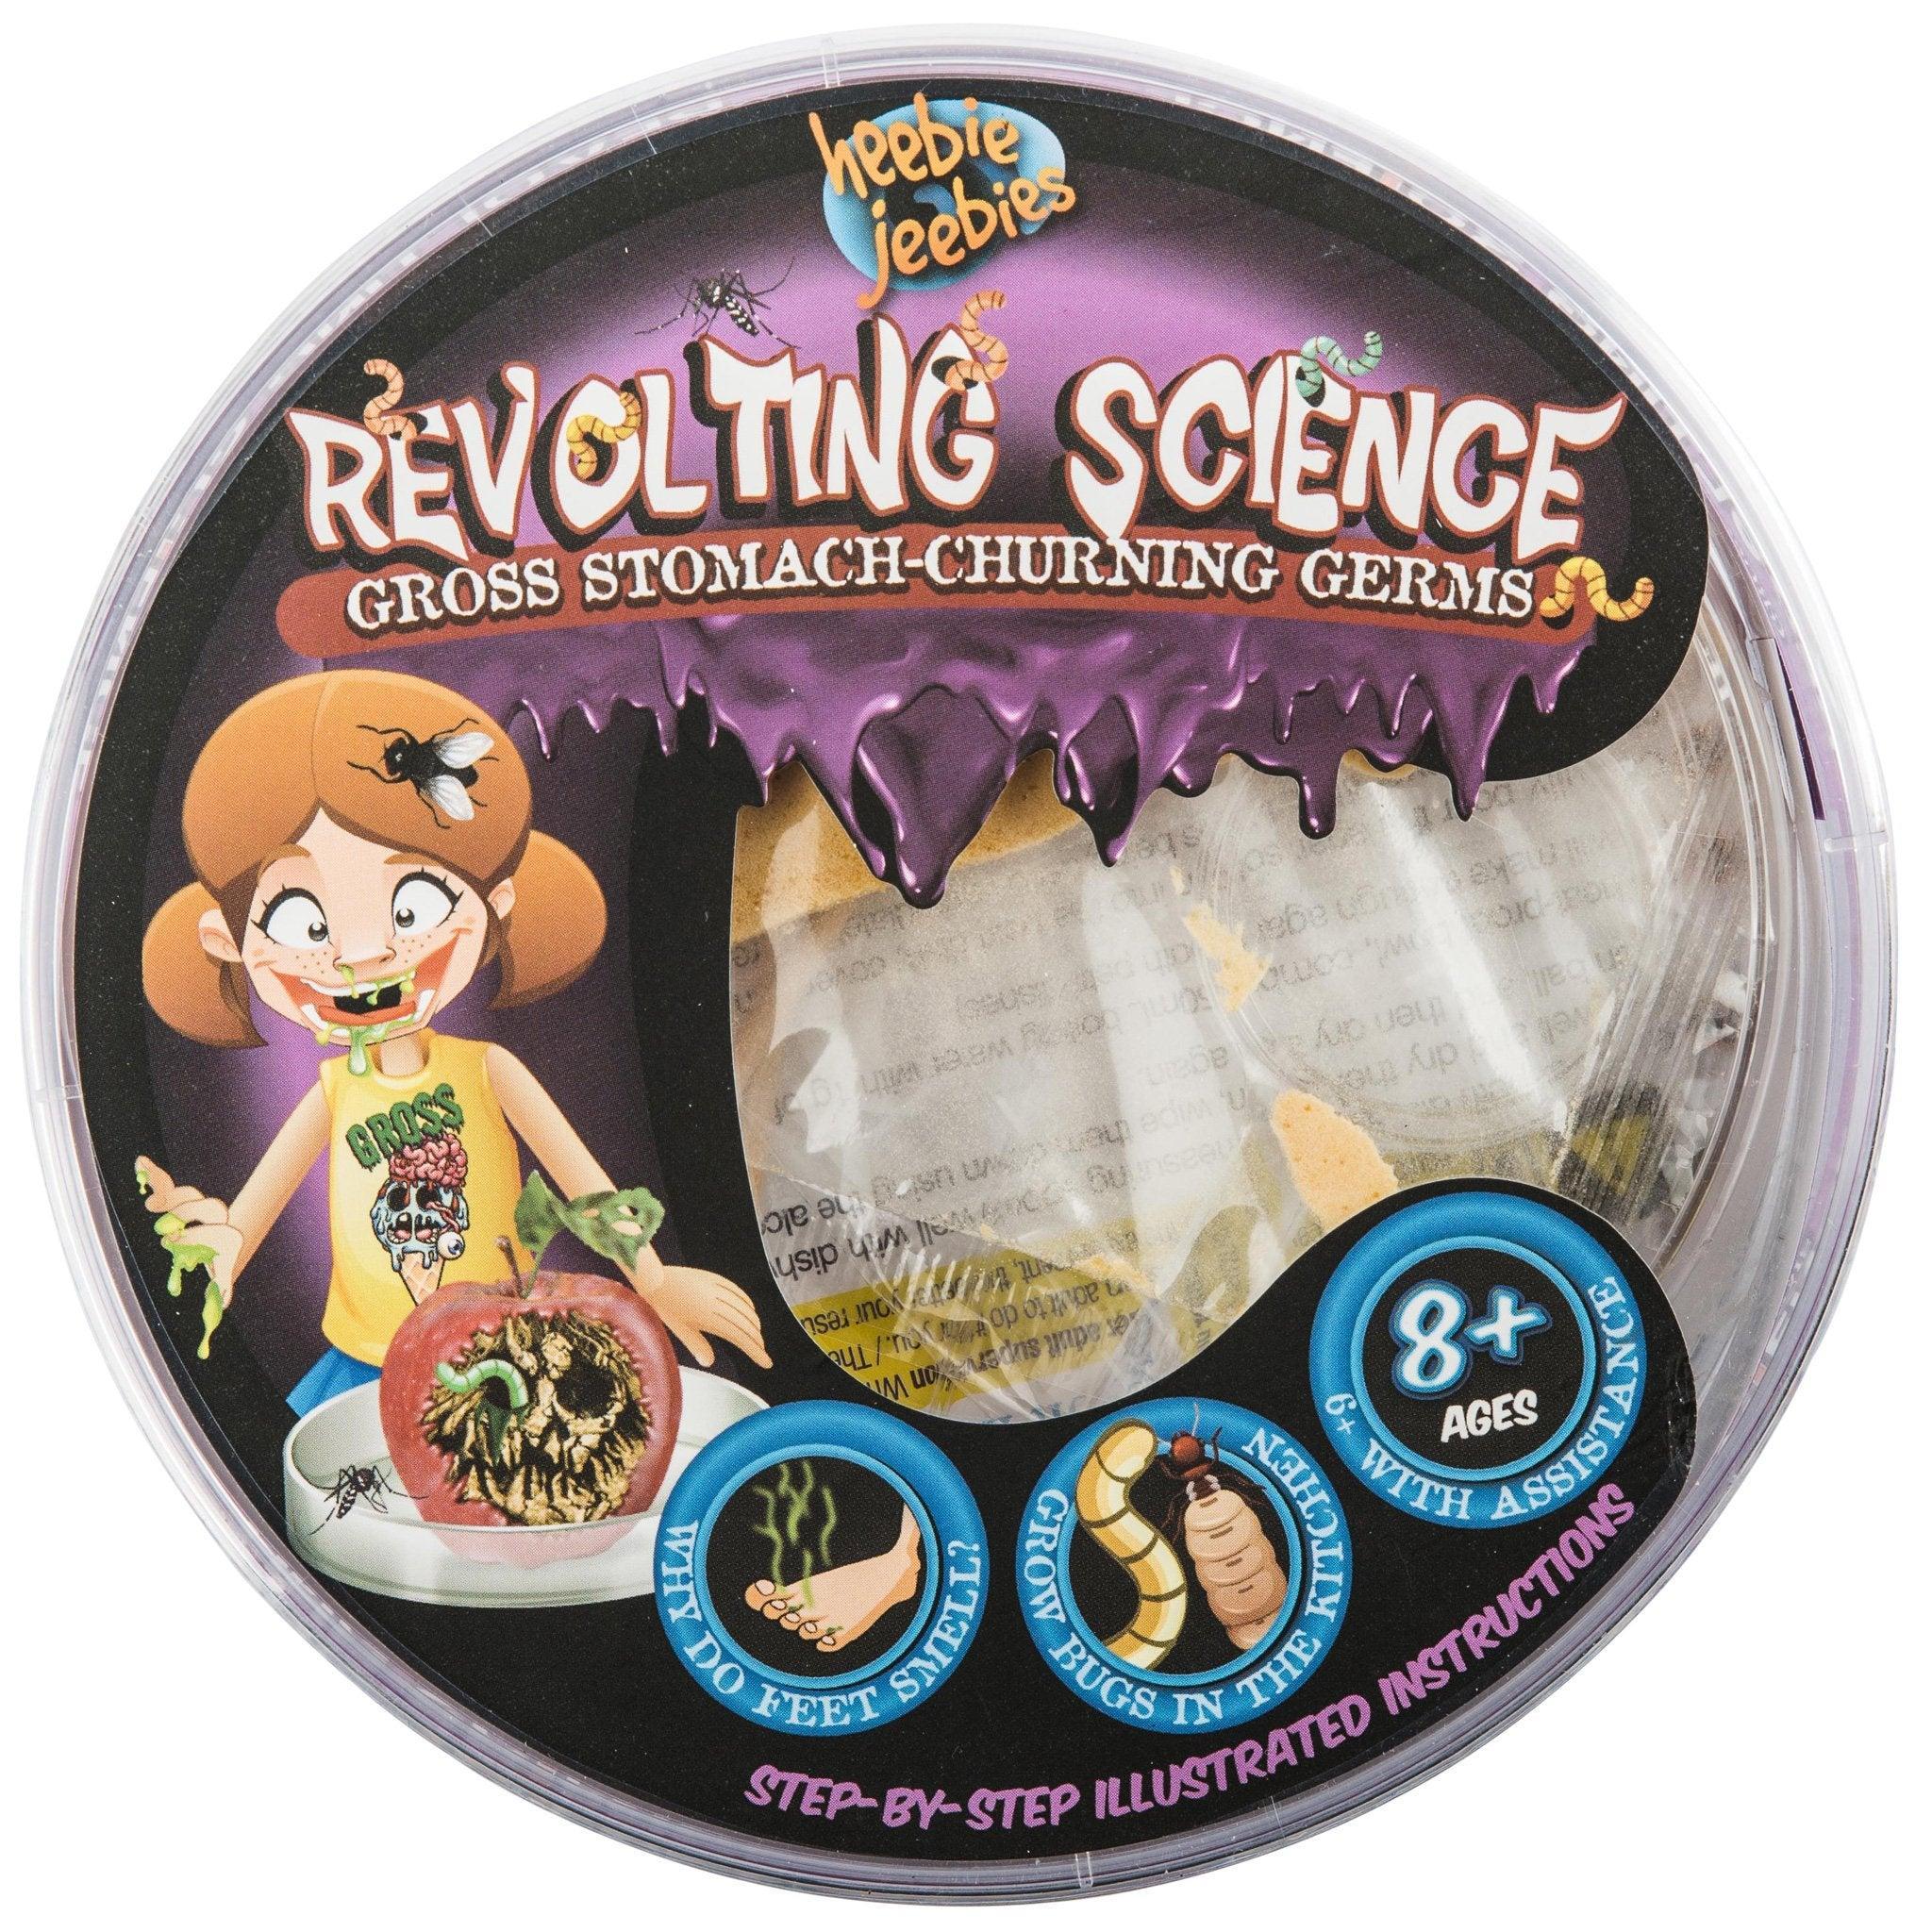 Revolting Science Petri Dish Grow and Learn About Bacteria